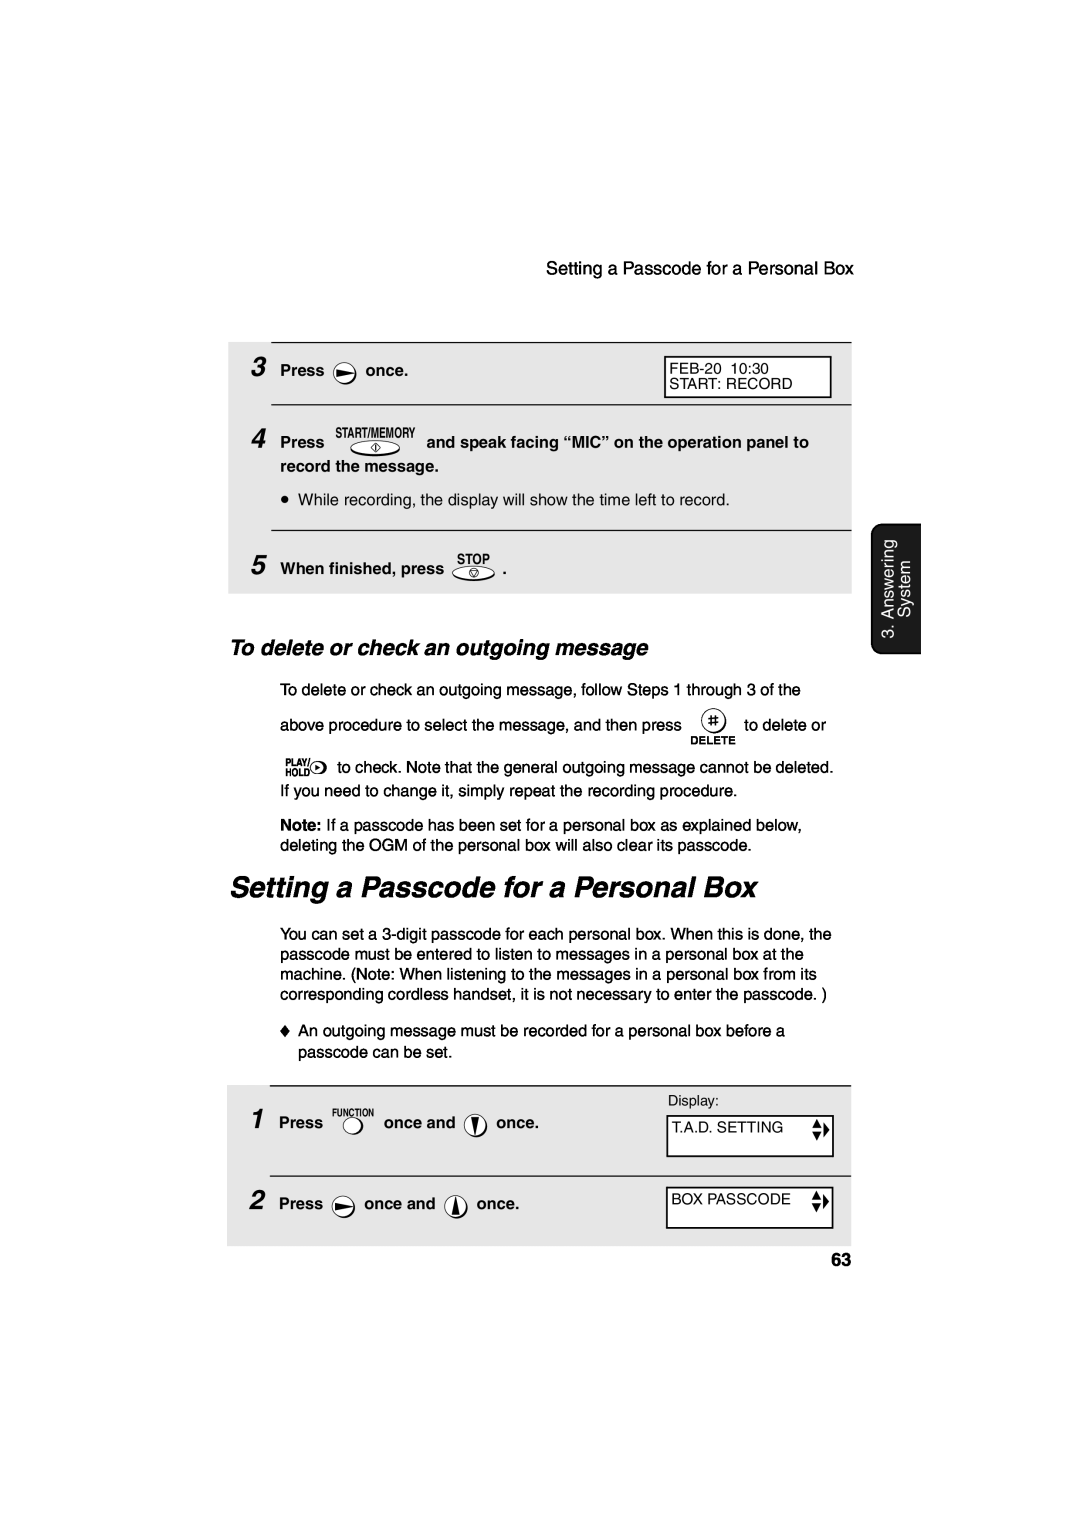 Sharp UX-CD600 Setting a Passcode for a Personal Box, To delete or check an outgoing message, Answering, System 